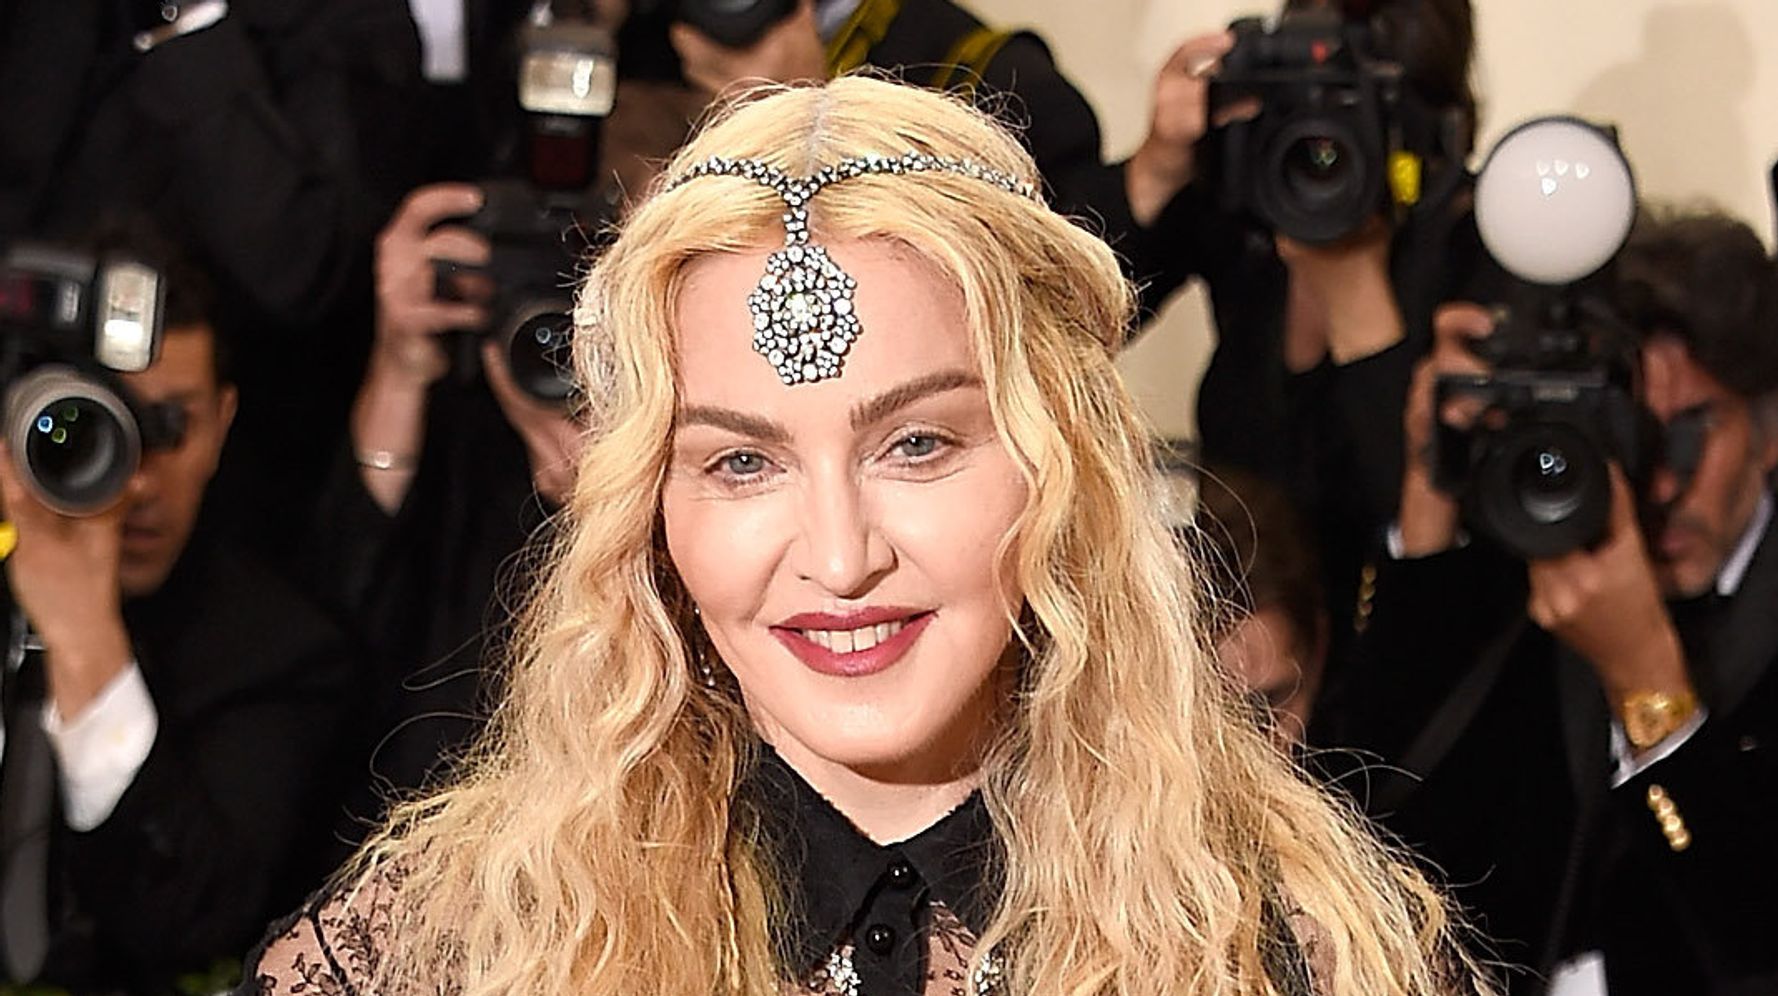 Madonna's Met Gala 2017 Look Is Army Chic!: Photo 3893031